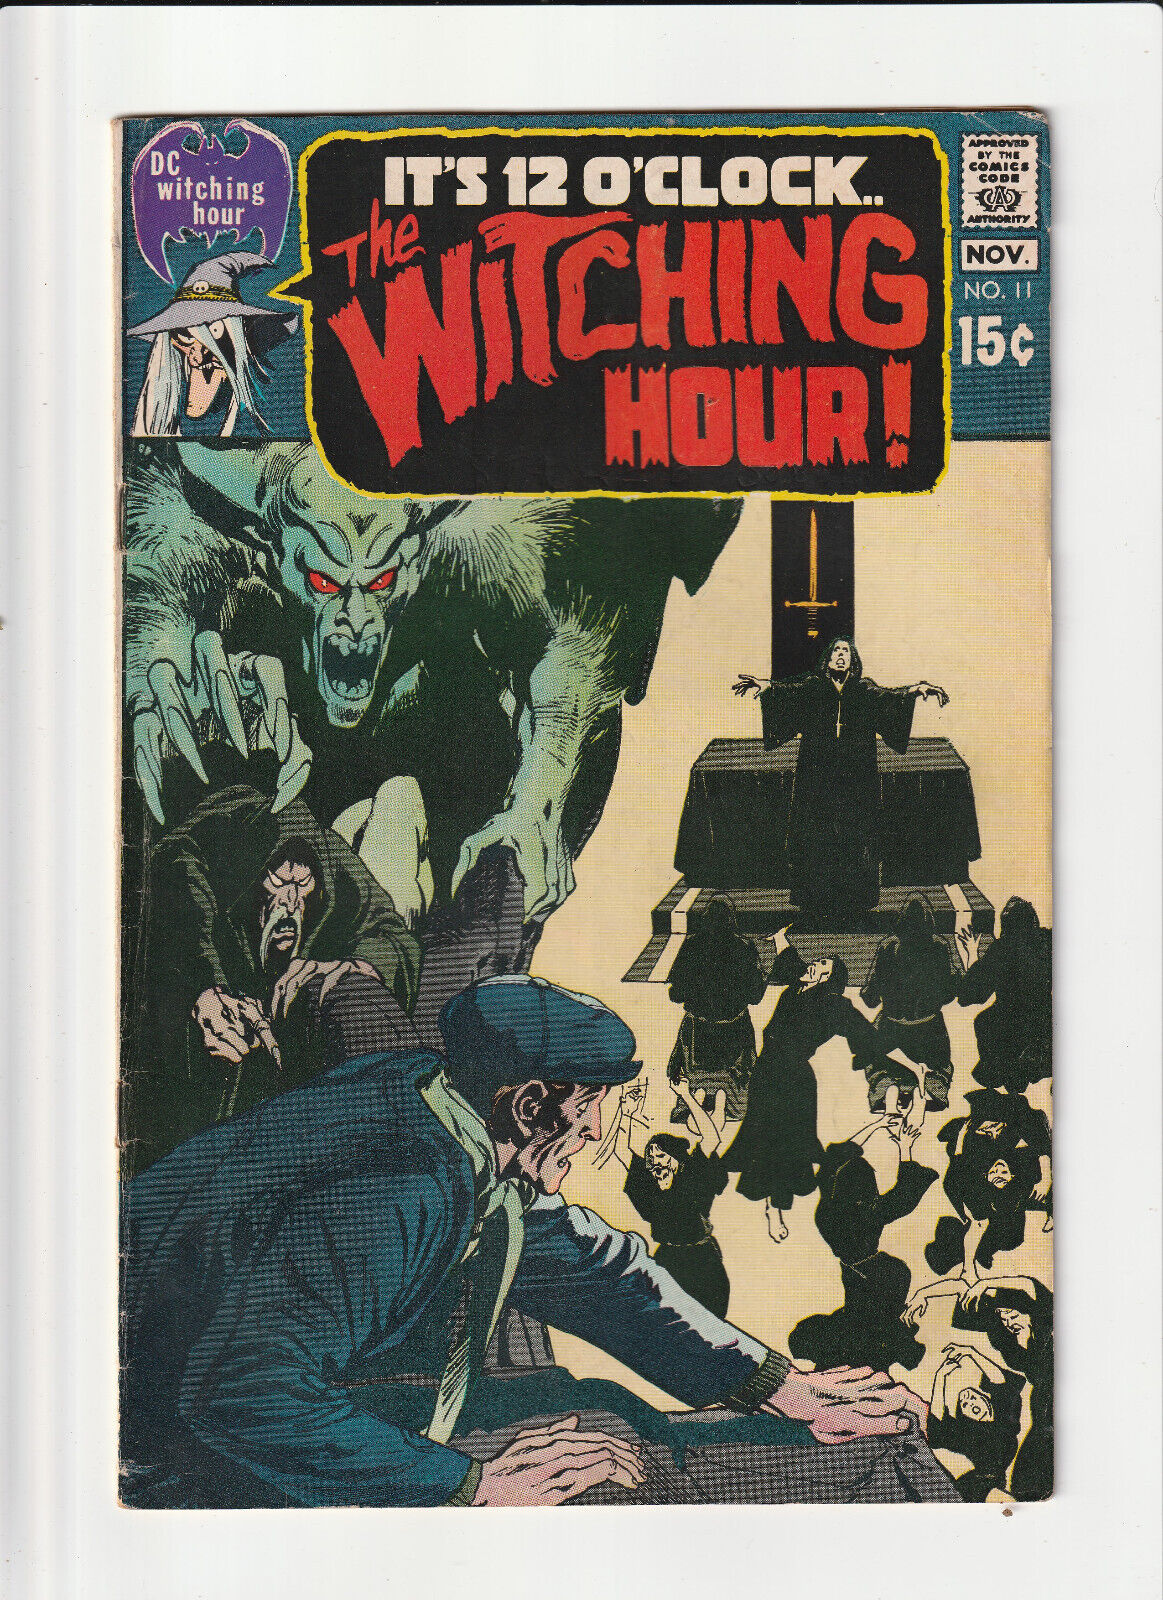 The Witching Hour #11, 5.0 VG/FN, DC 1970, Combined Shipping